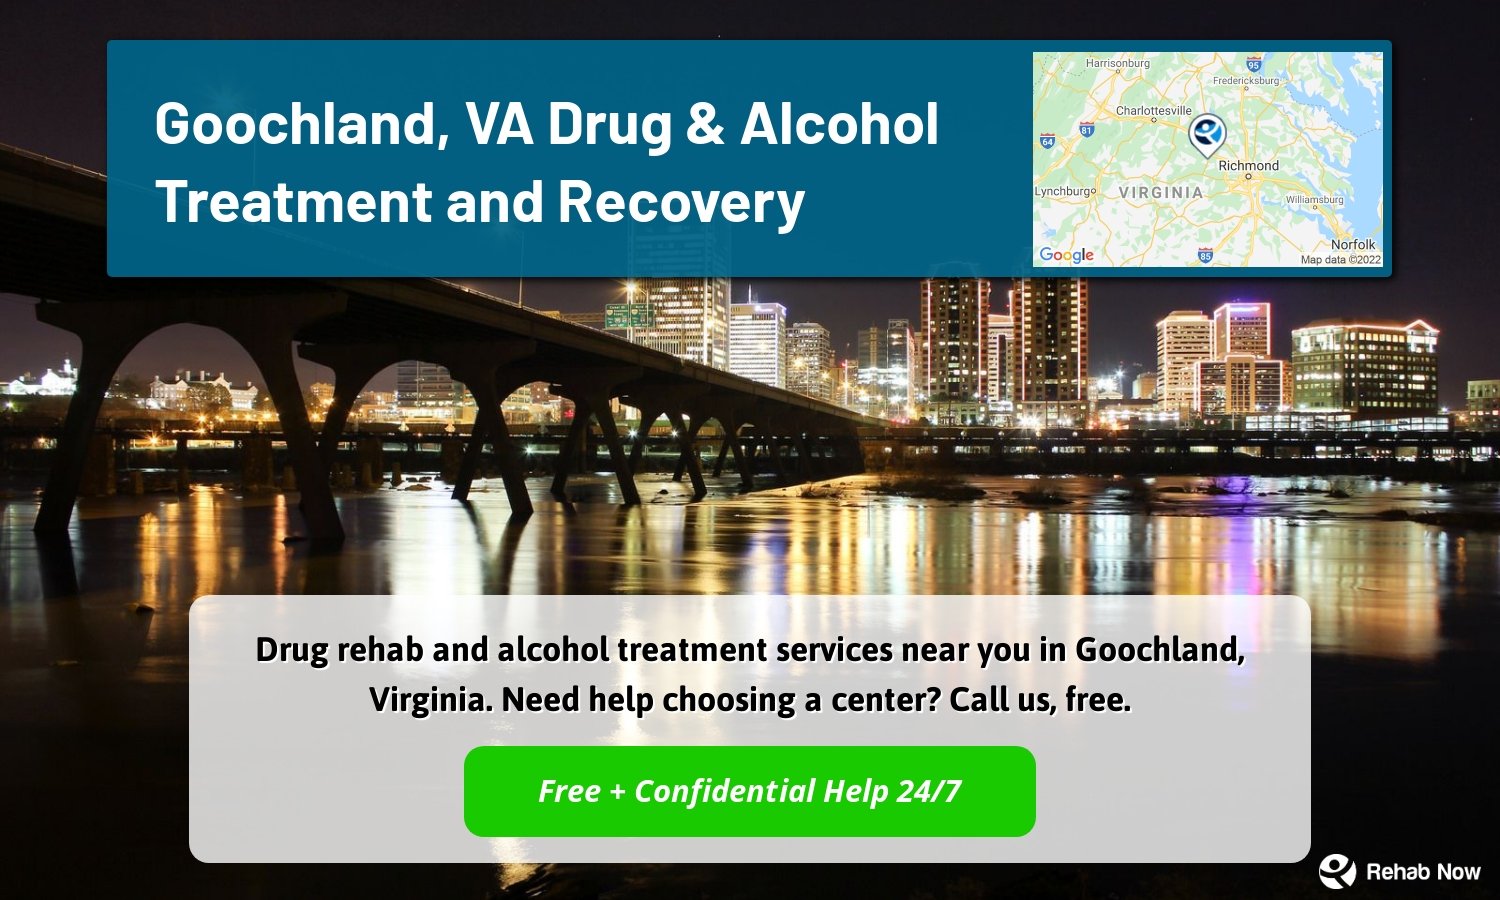 Drug rehab and alcohol treatment services near you in Goochland, Virginia. Need help choosing a center? Call us, free.